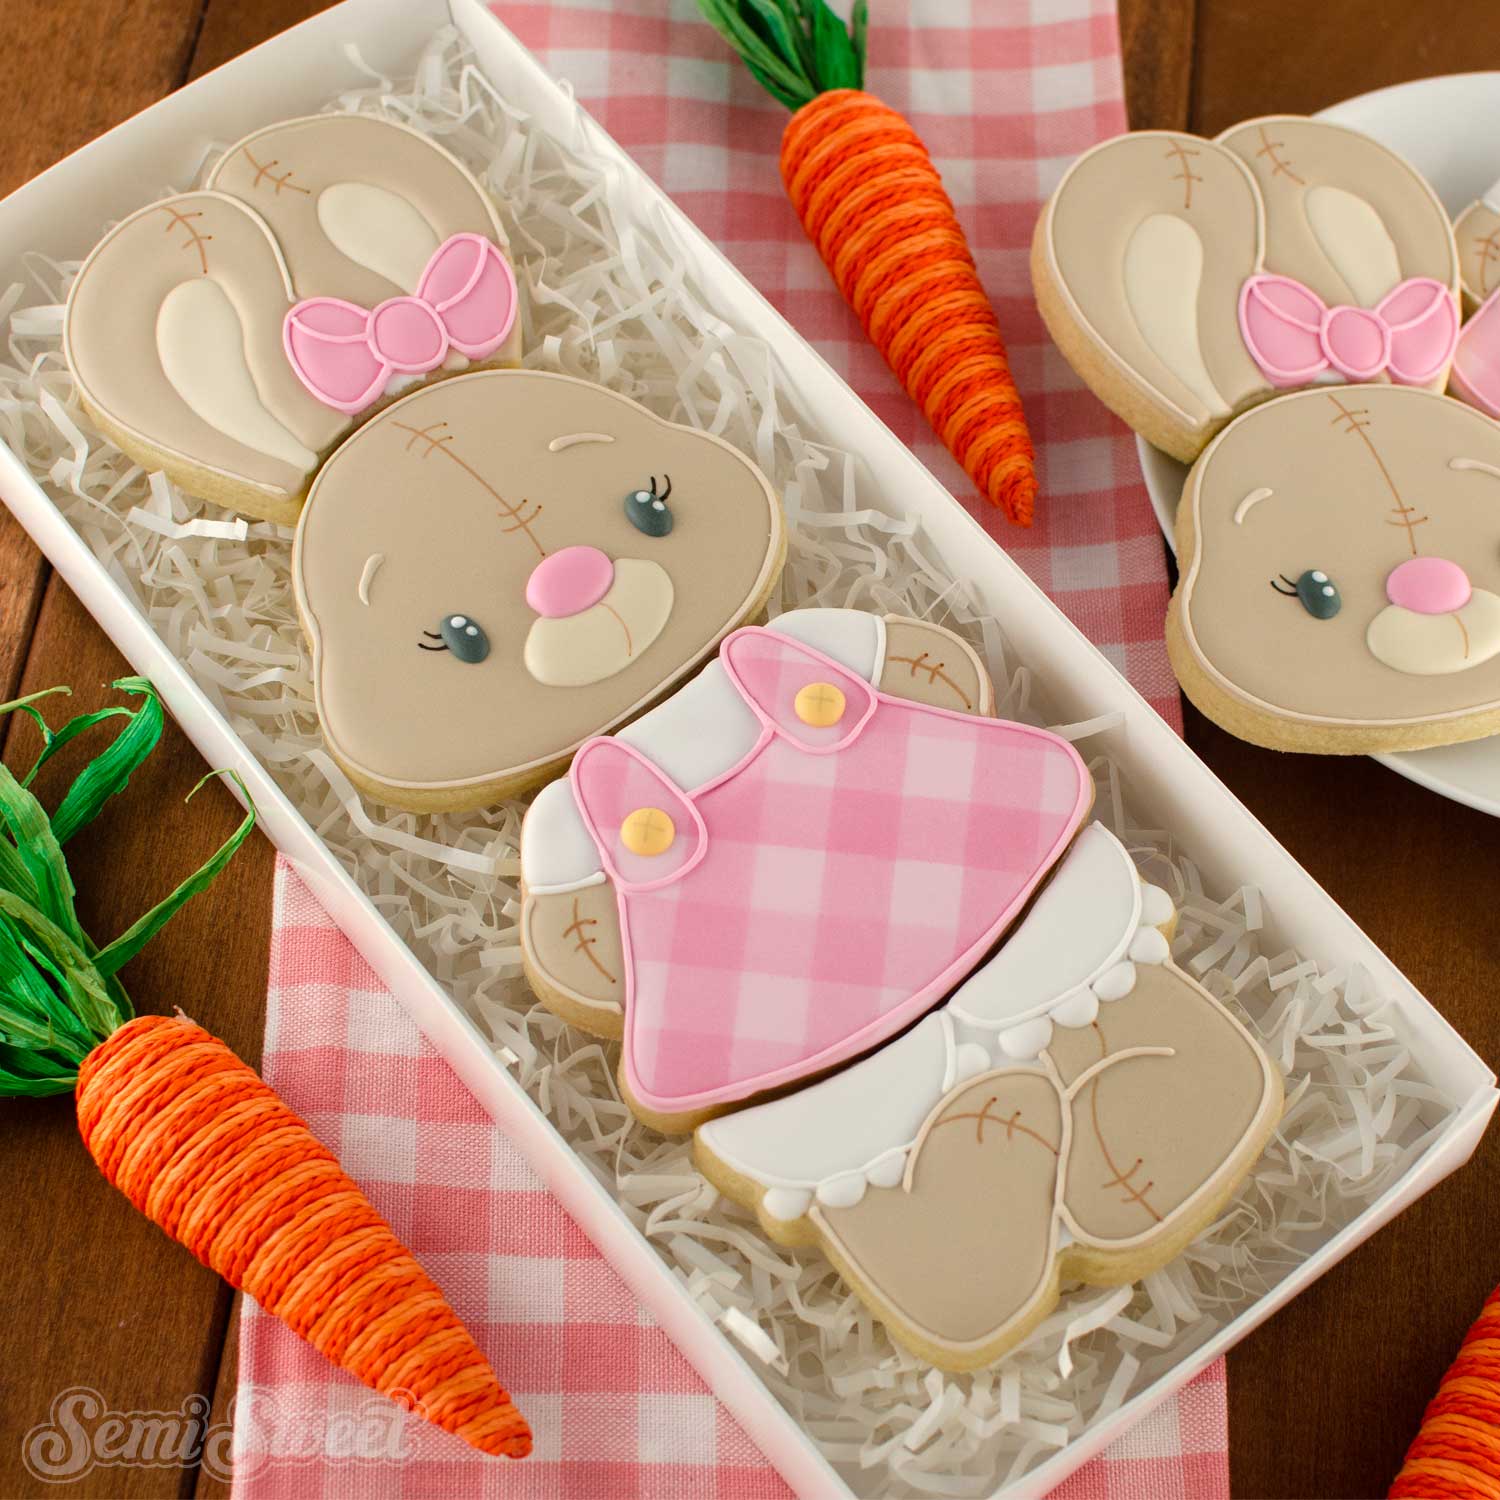 cute easter bunny Cookie Cutter set 0296